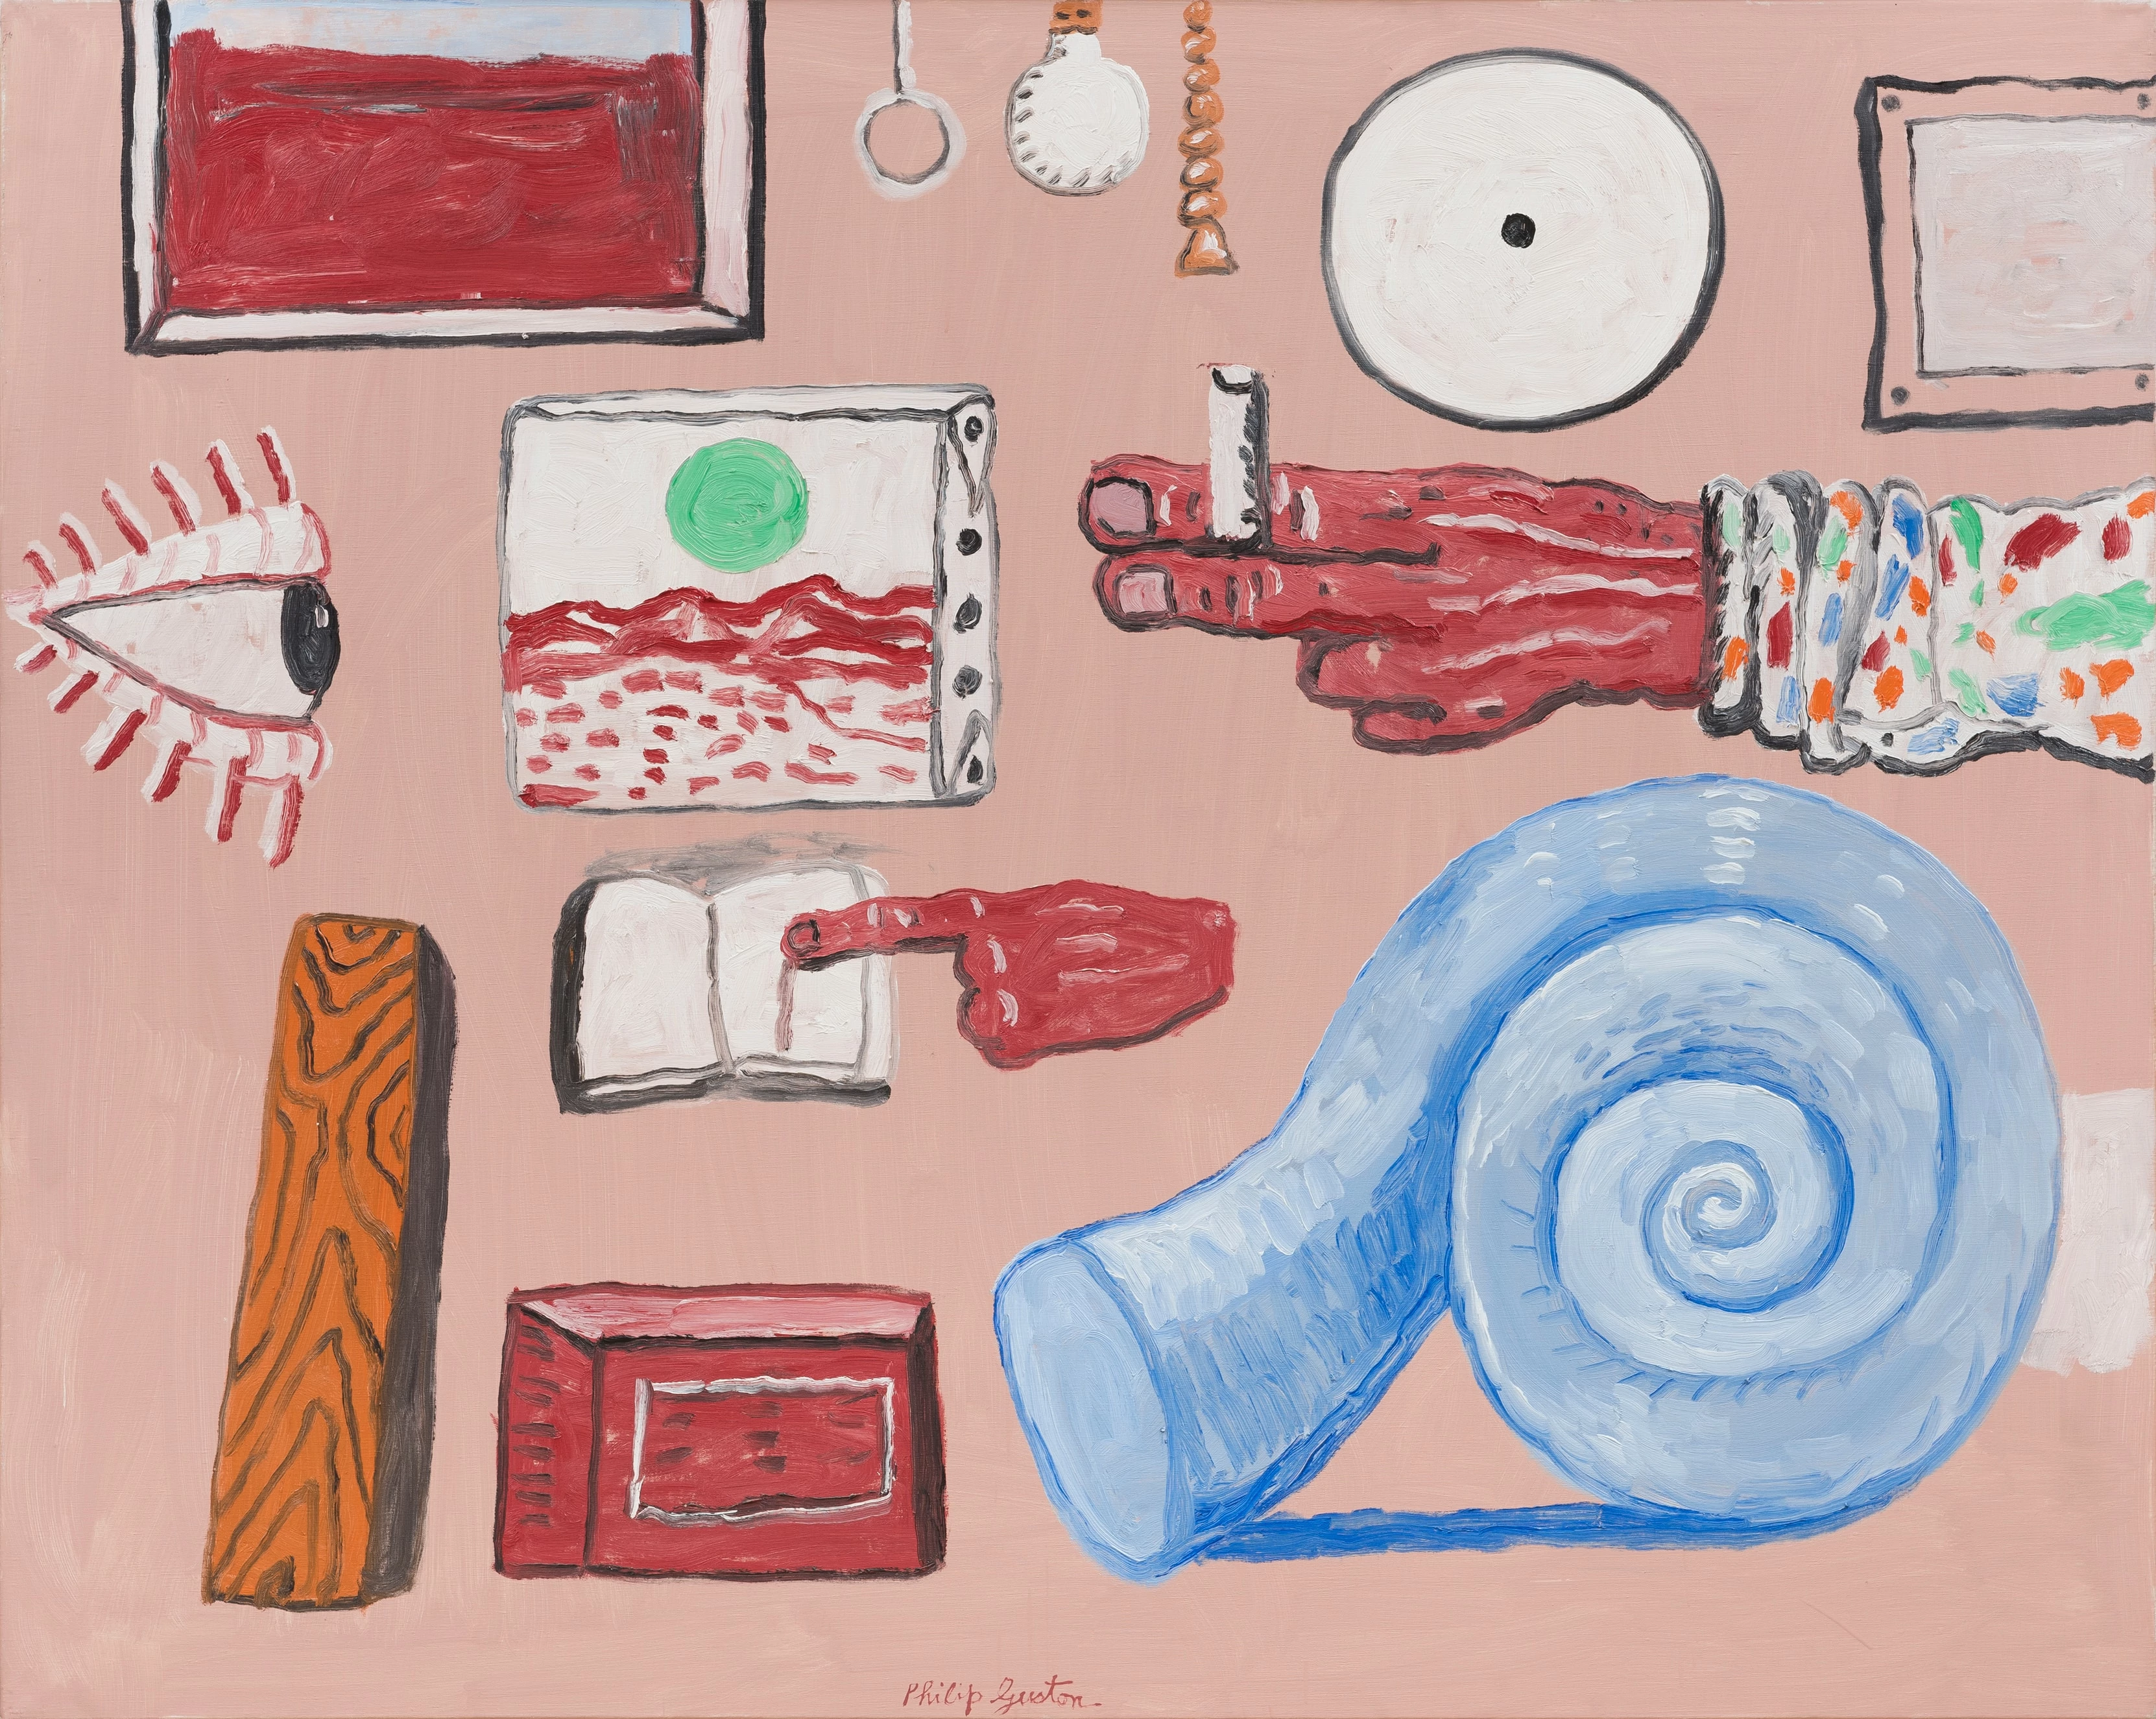 Philip Guston, The Artists